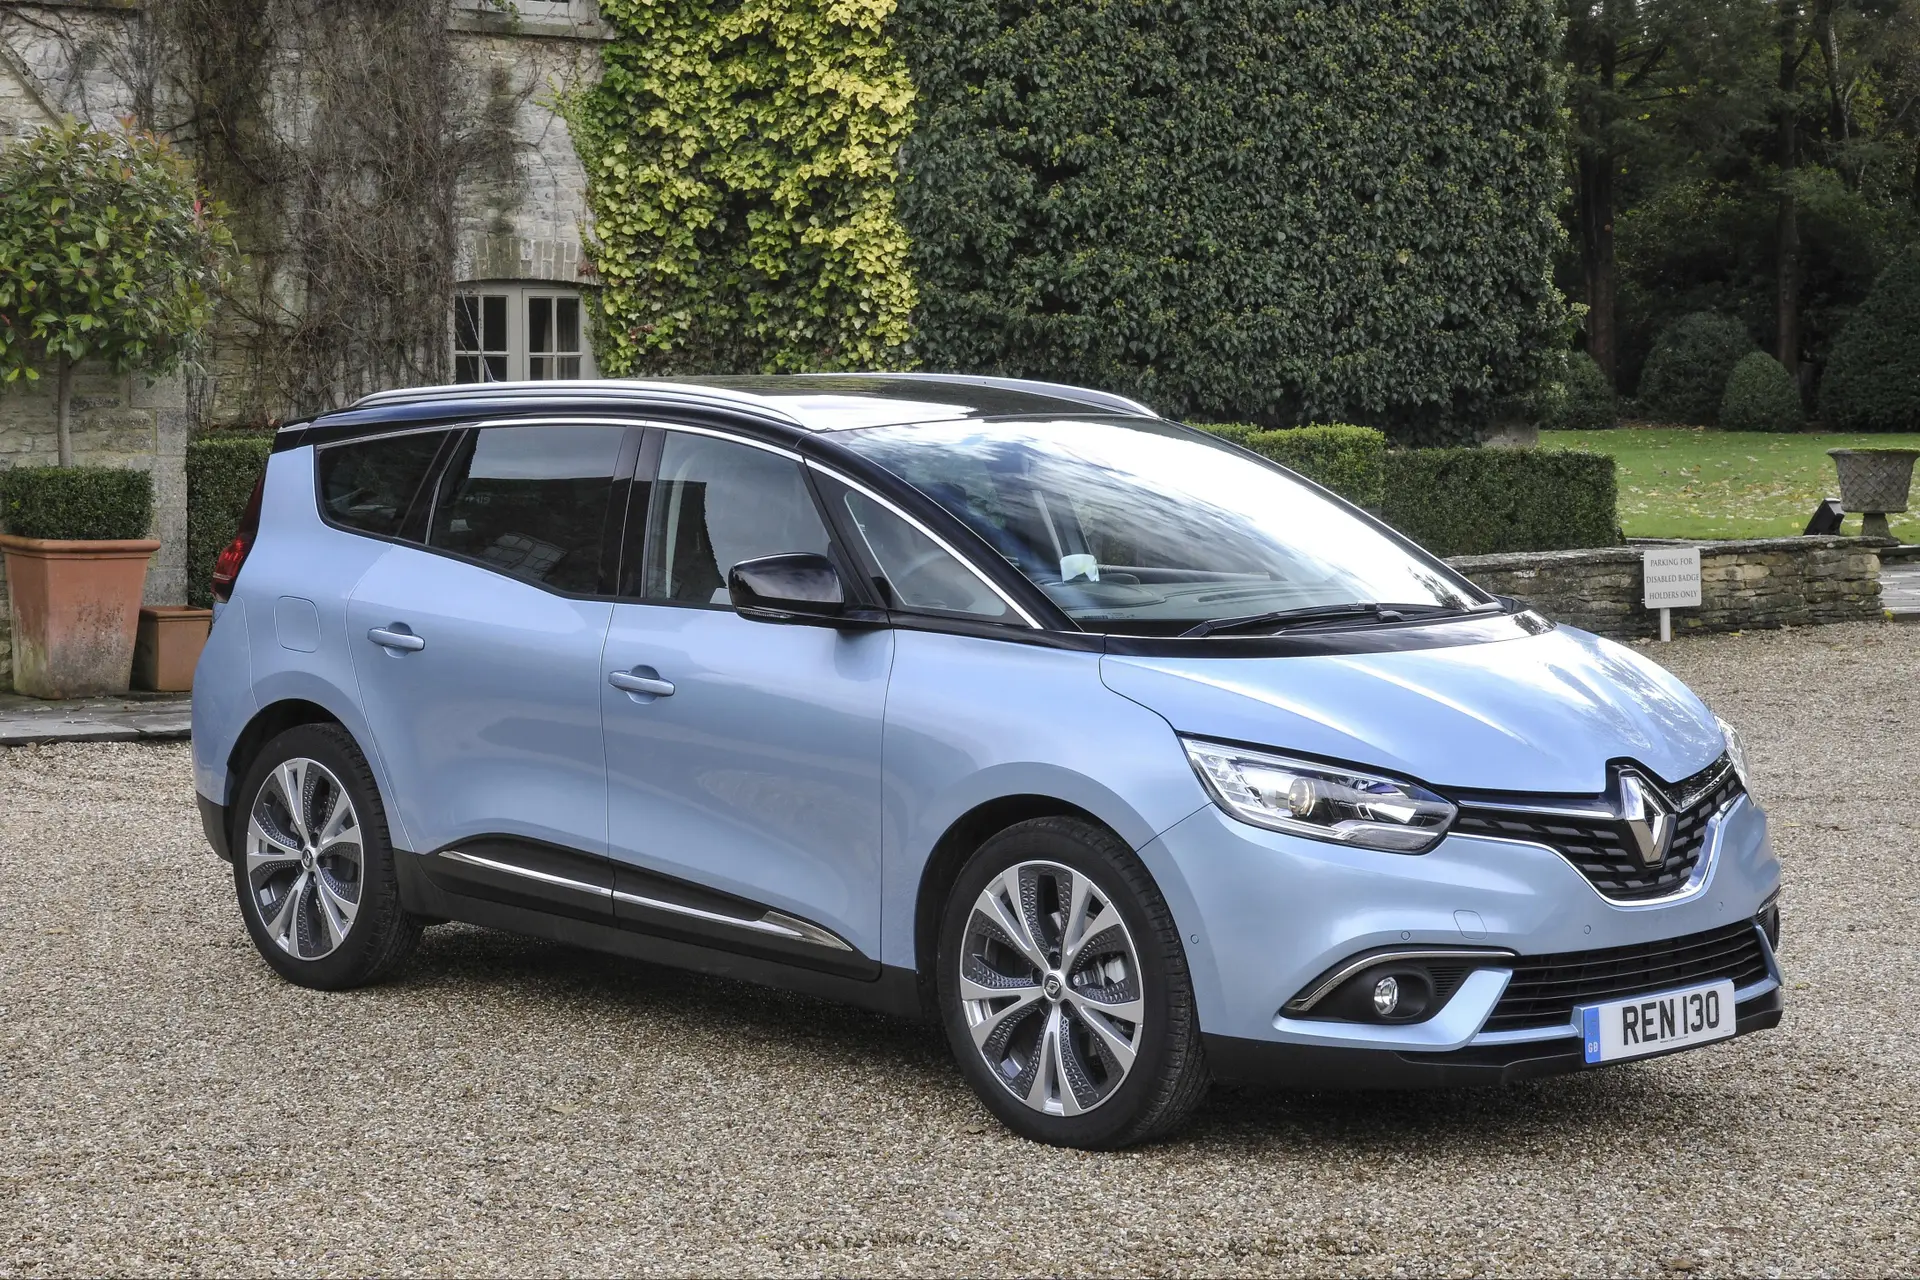 Renault Grand Scenic (2016-2002) Review: exterior front three quarter photo of the Renault Grand Scenic